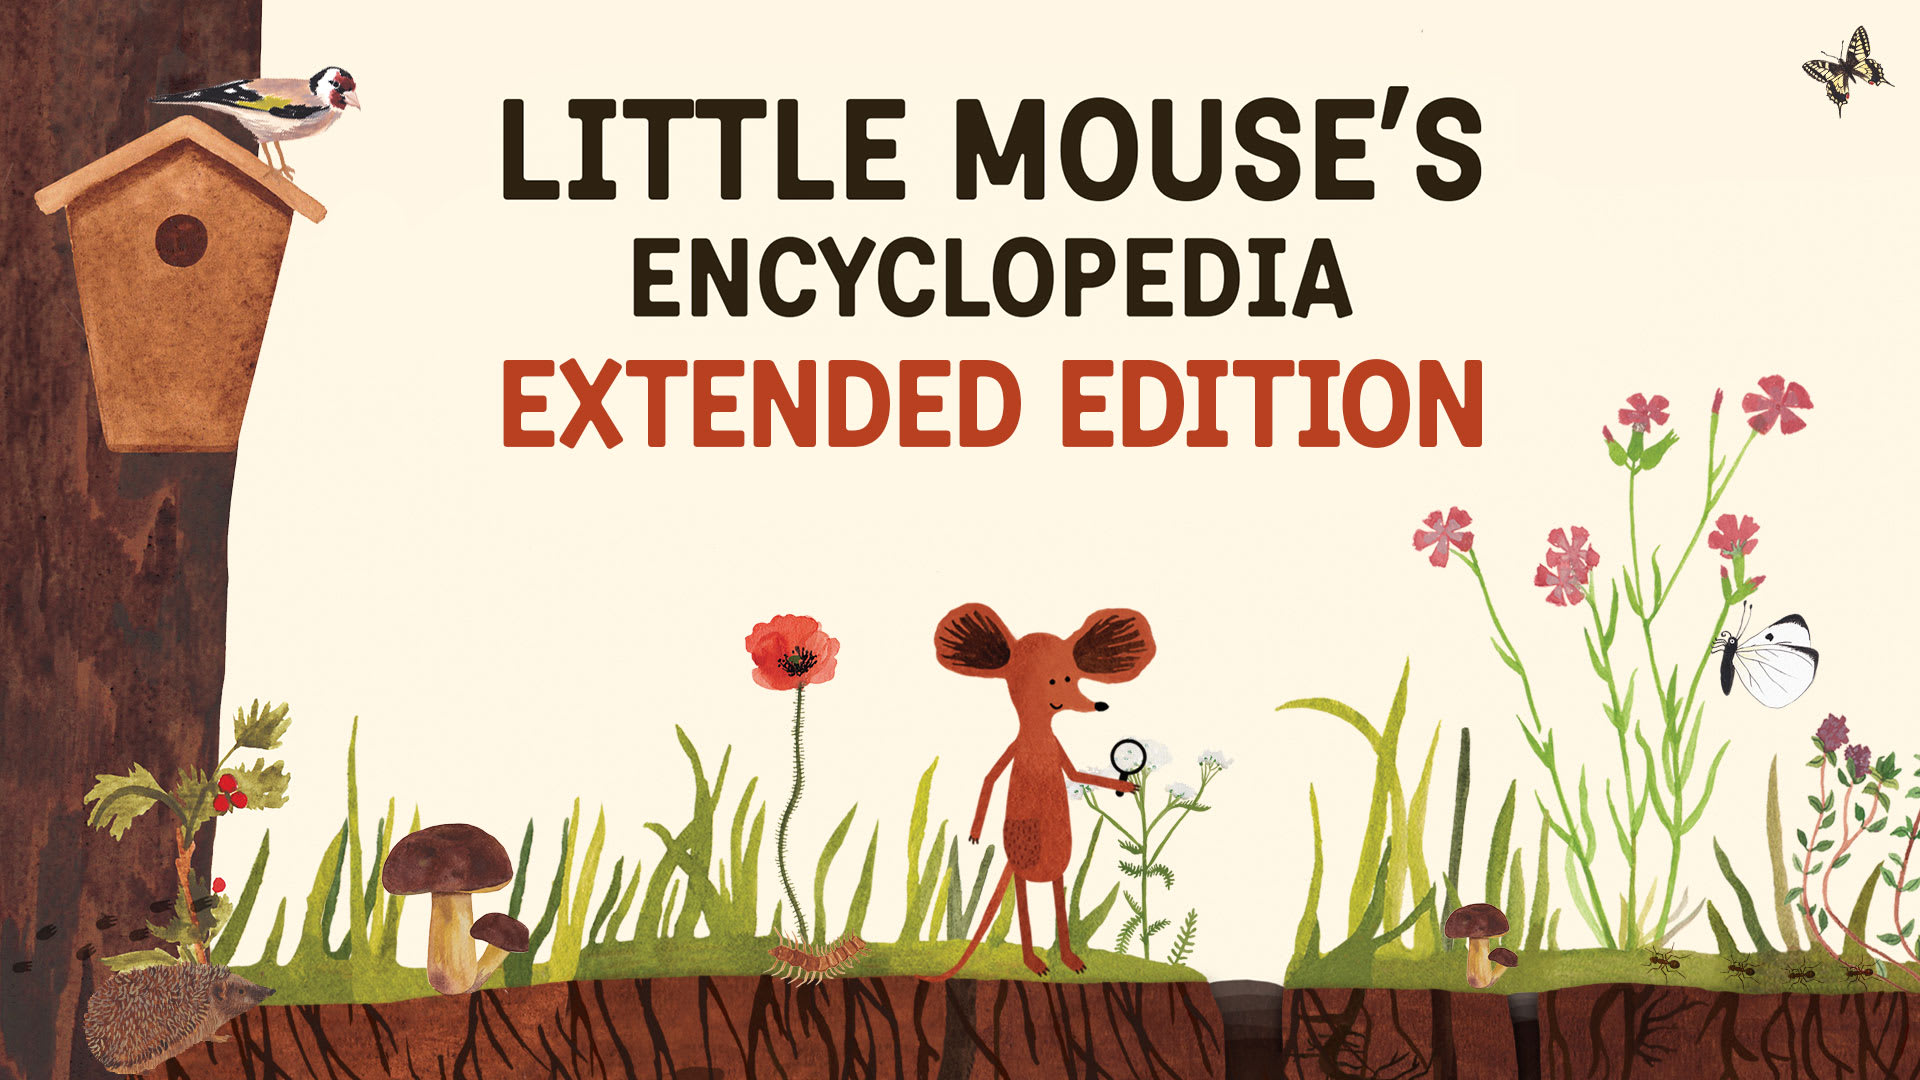 Little Mouse's Encyclopedia Extended Edition